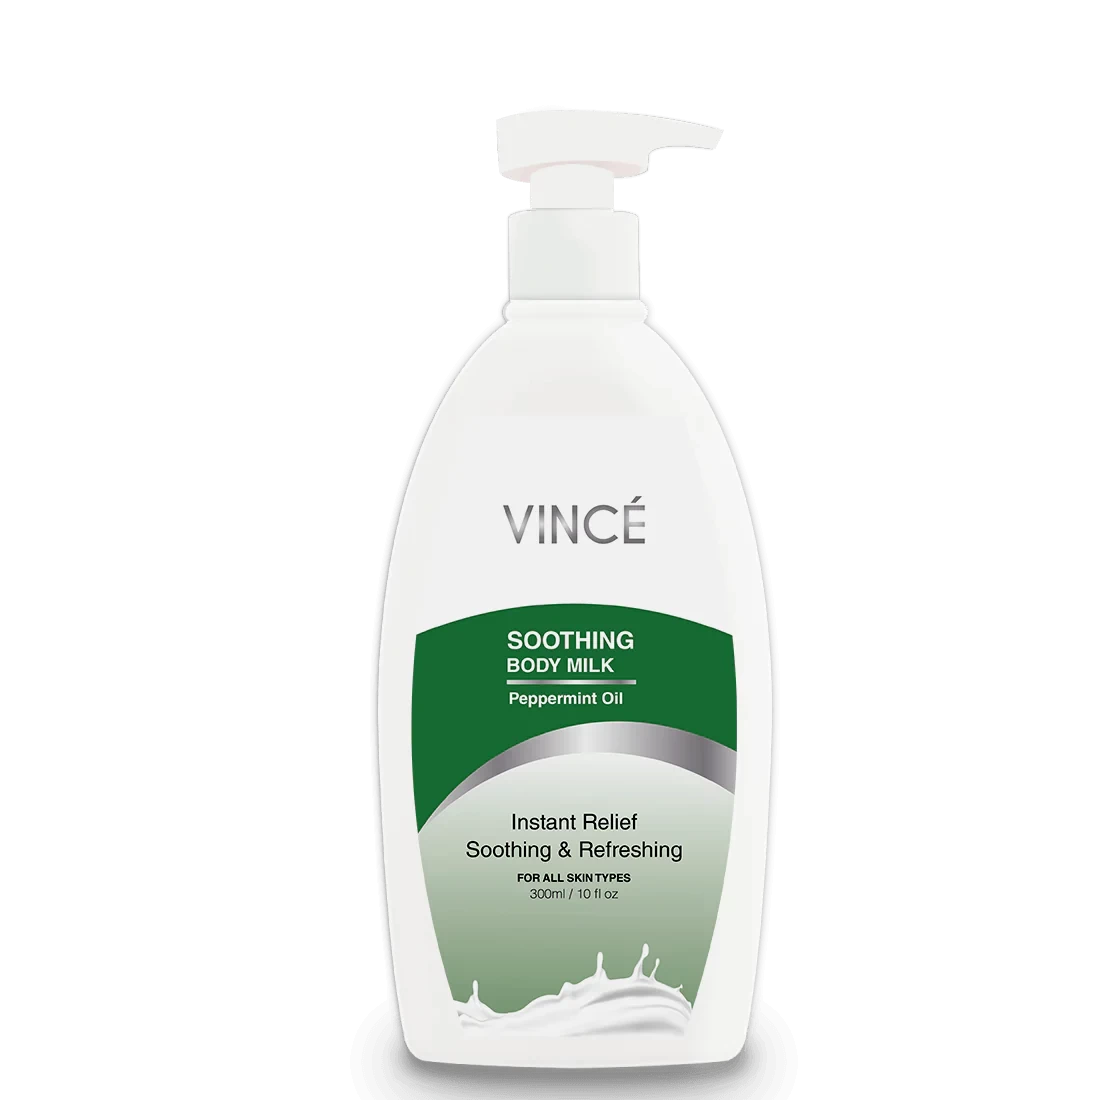 Vince Soothing Body Milk